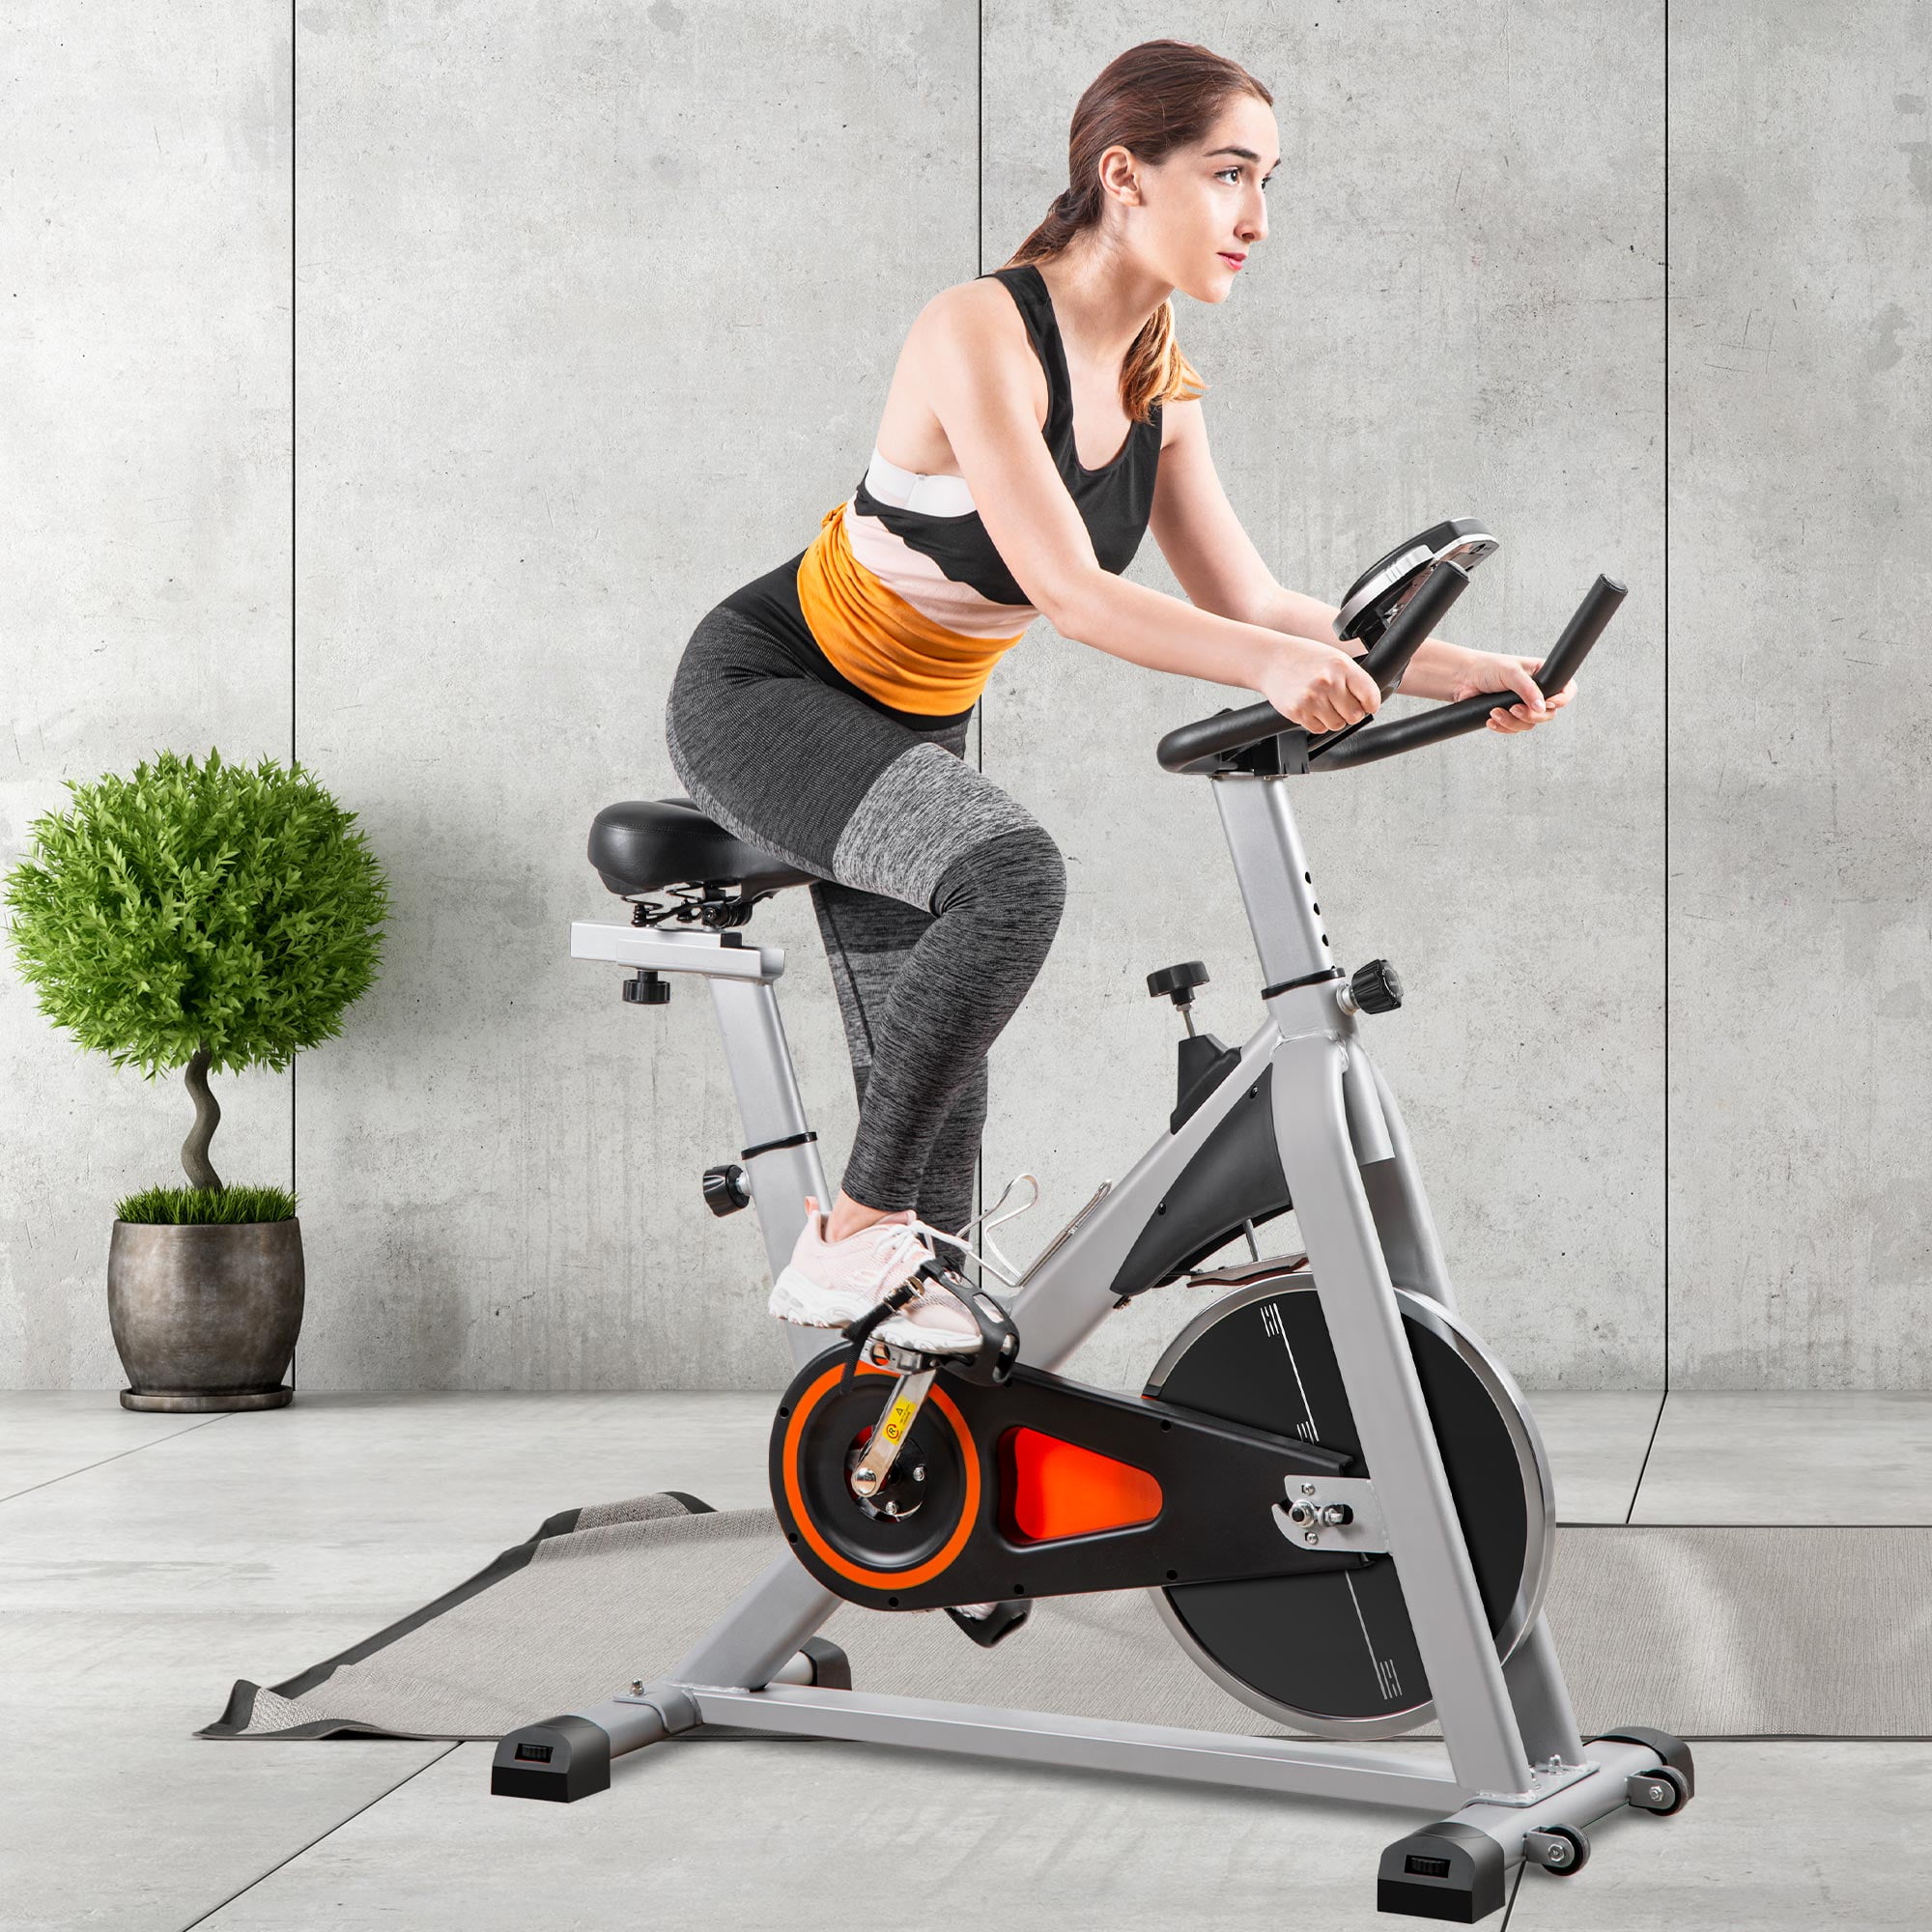 UPGO Indoor Cycling Exercise Bike Gym Fitness Stationary Bicycle For H ...